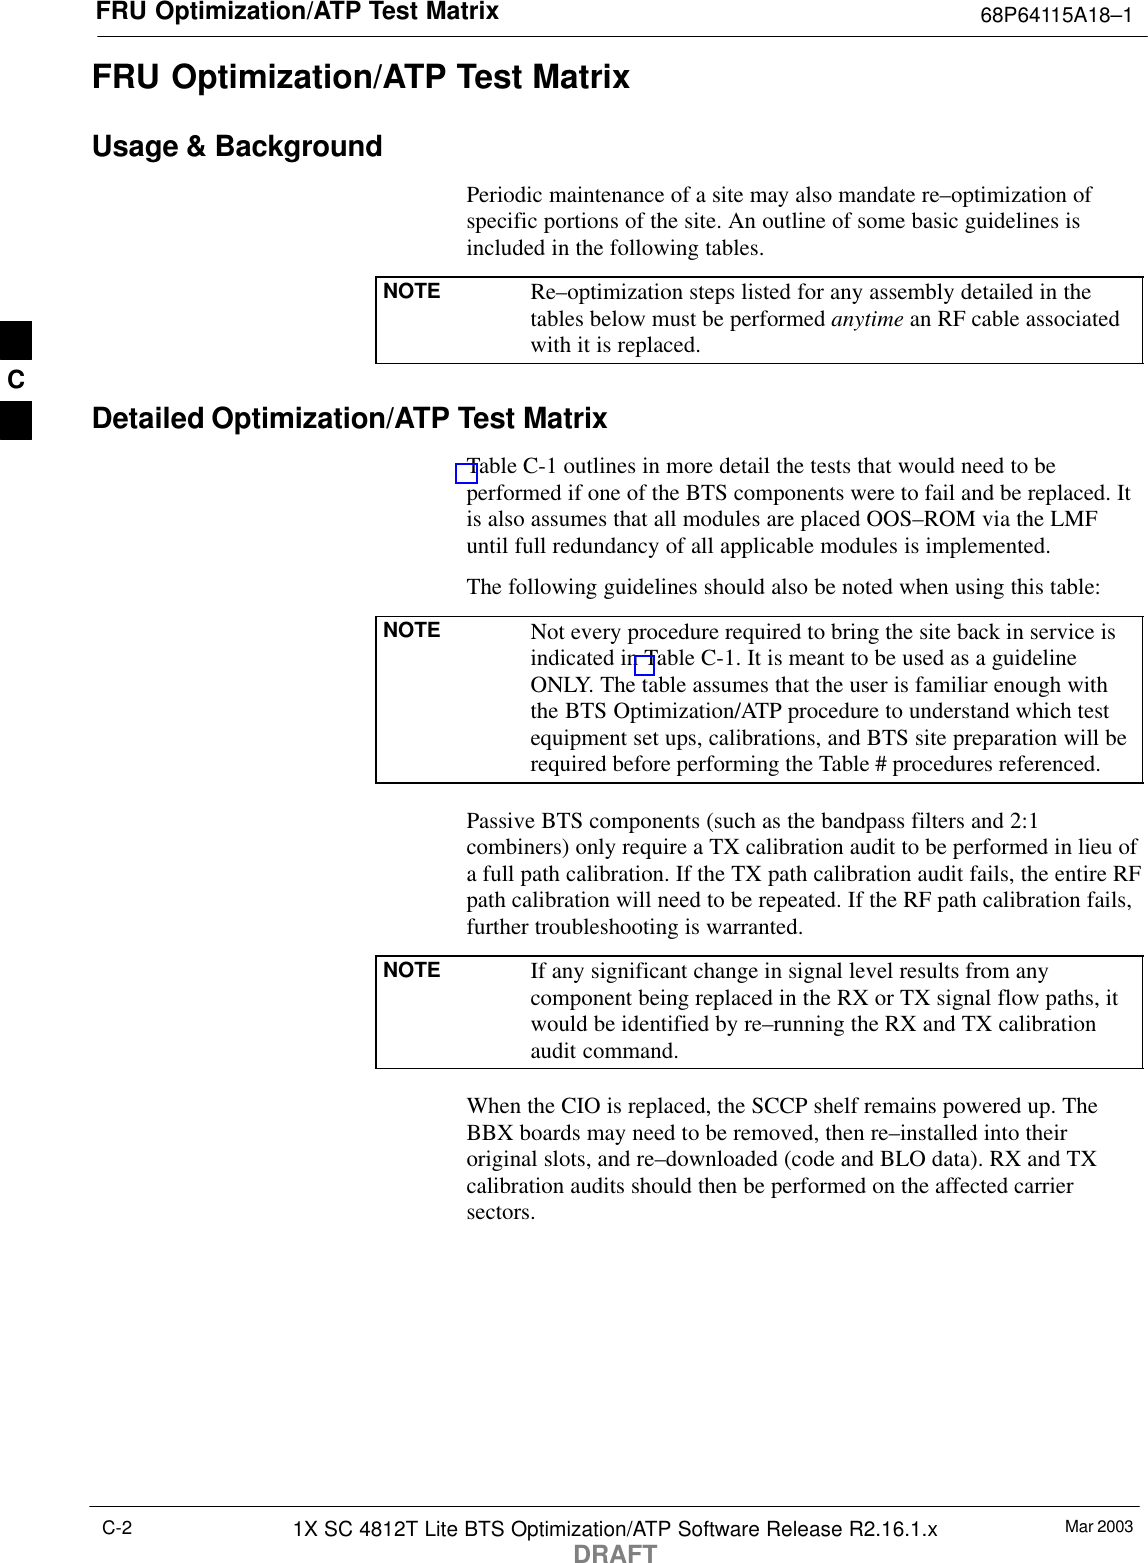 FRU Optimization/ATP Test Matrix 68P64115A18–1Mar 20031X SC 4812T Lite BTS Optimization/ATP Software Release R2.16.1.xDRAFTC-2FRU Optimization/ATP Test MatrixUsage &amp; BackgroundPeriodic maintenance of a site may also mandate re–optimization ofspecific portions of the site. An outline of some basic guidelines isincluded in the following tables.NOTE Re–optimization steps listed for any assembly detailed in thetables below must be performed anytime an RF cable associatedwith it is replaced.Detailed Optimization/ATP Test MatrixTable C-1 outlines in more detail the tests that would need to beperformed if one of the BTS components were to fail and be replaced. Itis also assumes that all modules are placed OOS–ROM via the LMFuntil full redundancy of all applicable modules is implemented.The following guidelines should also be noted when using this table:NOTE Not every procedure required to bring the site back in service isindicated in Table C-1. It is meant to be used as a guidelineONLY. The table assumes that the user is familiar enough withthe BTS Optimization/ATP procedure to understand which testequipment set ups, calibrations, and BTS site preparation will berequired before performing the Table # procedures referenced.Passive BTS components (such as the bandpass filters and 2:1combiners) only require a TX calibration audit to be performed in lieu ofa full path calibration. If the TX path calibration audit fails, the entire RFpath calibration will need to be repeated. If the RF path calibration fails,further troubleshooting is warranted.NOTE If any significant change in signal level results from anycomponent being replaced in the RX or TX signal flow paths, itwould be identified by re–running the RX and TX calibrationaudit command.When the CIO is replaced, the SCCP shelf remains powered up. TheBBX boards may need to be removed, then re–installed into theiroriginal slots, and re–downloaded (code and BLO data). RX and TXcalibration audits should then be performed on the affected carriersectors.C